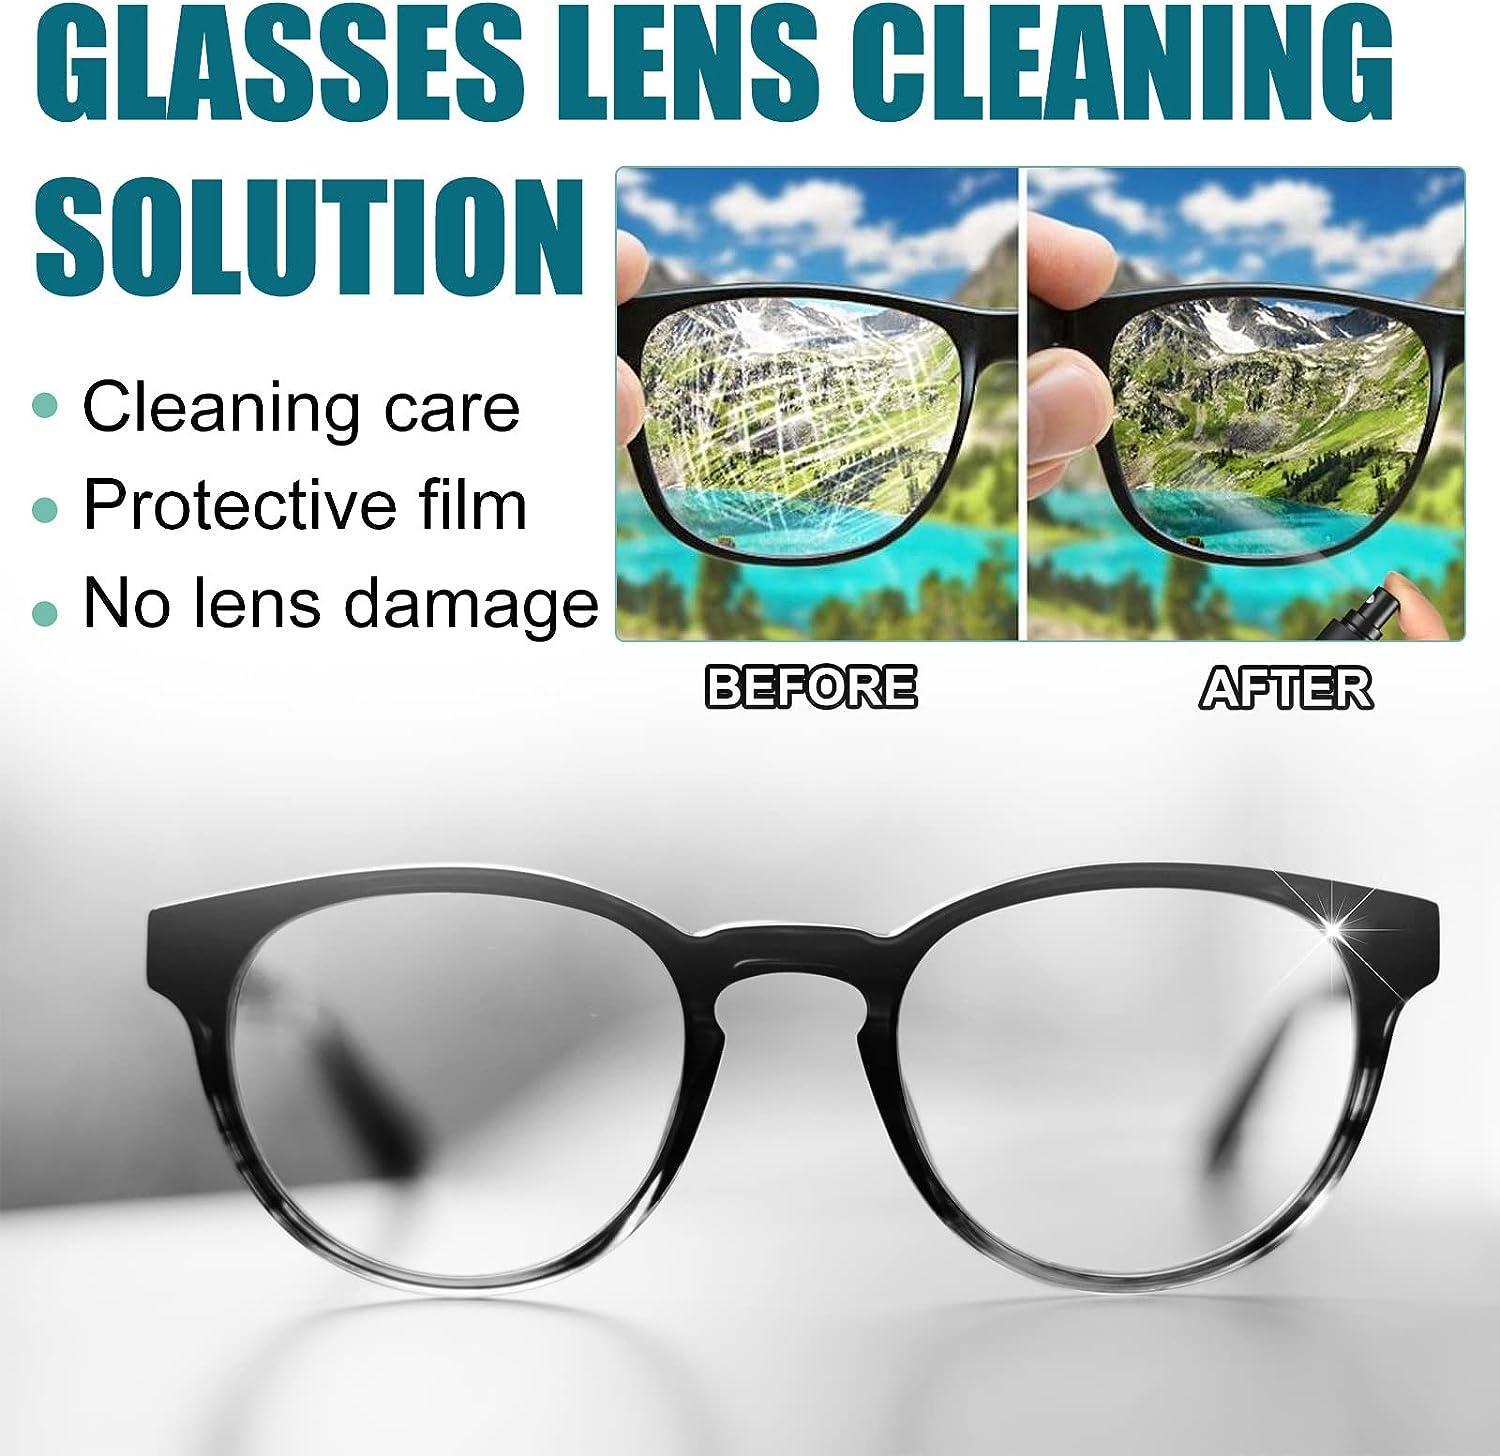 100ml Lens Scratch Removal Spray, Eyeglass Windshield Glass Repair Liquid, High Concentration Glasses Cleaner Spray for Glasses Screen Cleaner Tools